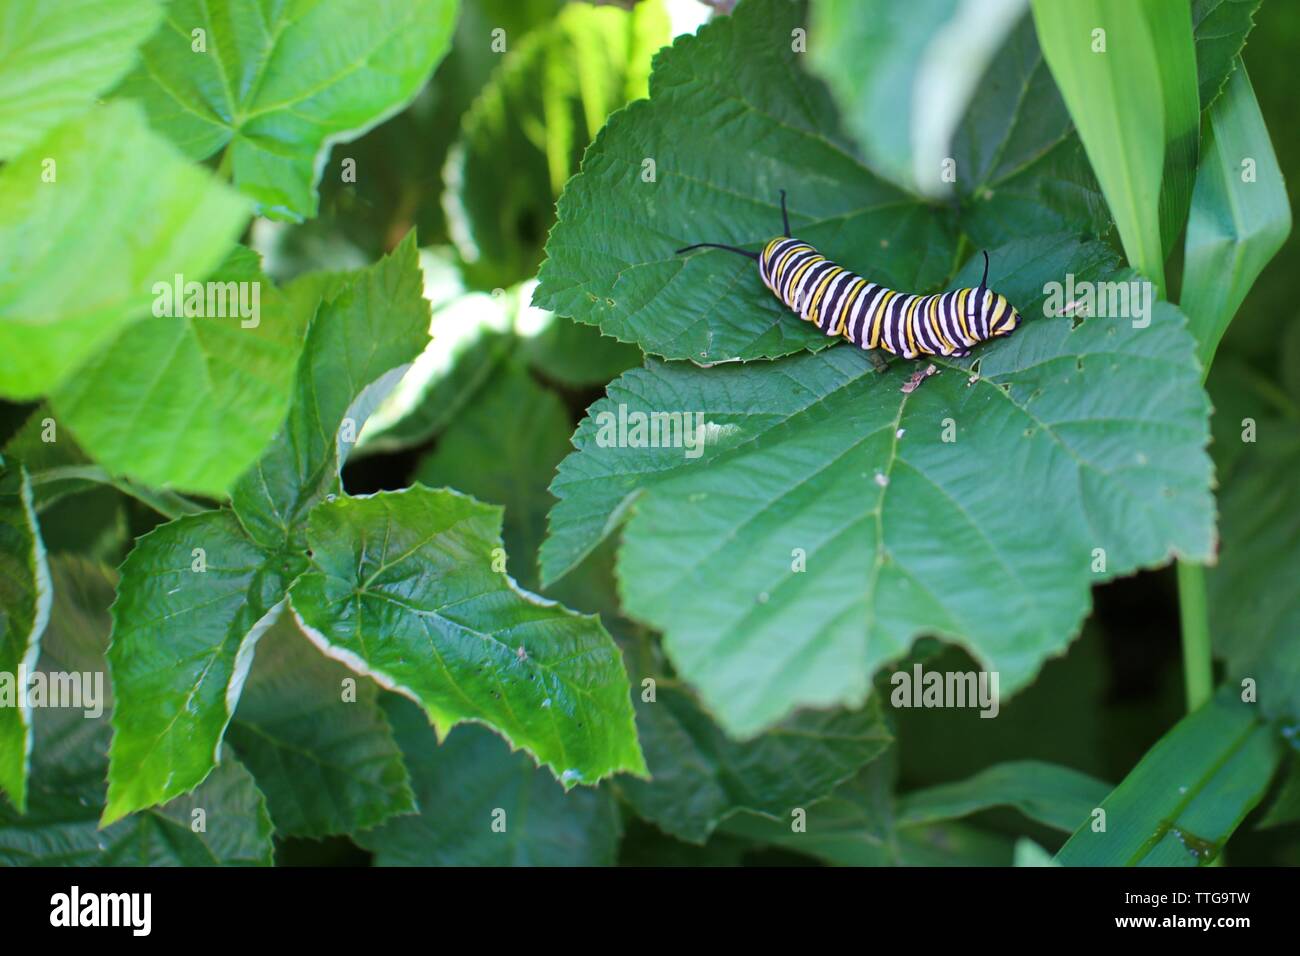 Monarch caterpillar resting on a leaf Stock Photo